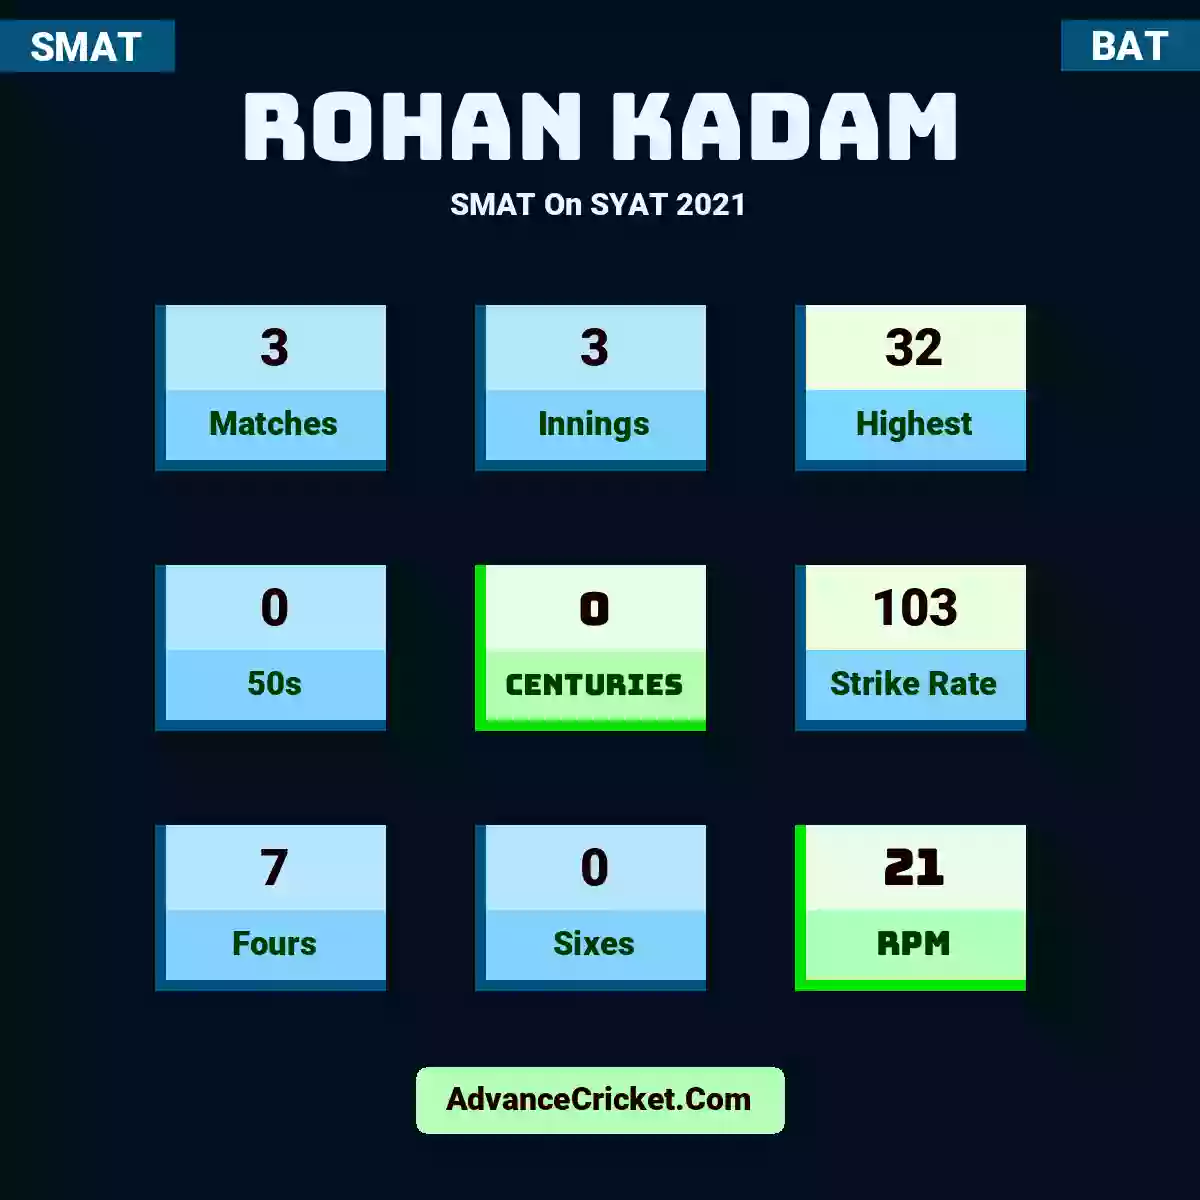 Rohan Kadam SMAT  On SYAT 2021, Rohan Kadam played 3 matches, scored 32 runs as highest, 0 half-centuries, and 0 centuries, with a strike rate of 103. R.Kadam hit 7 fours and 0 sixes, with an RPM of 21.